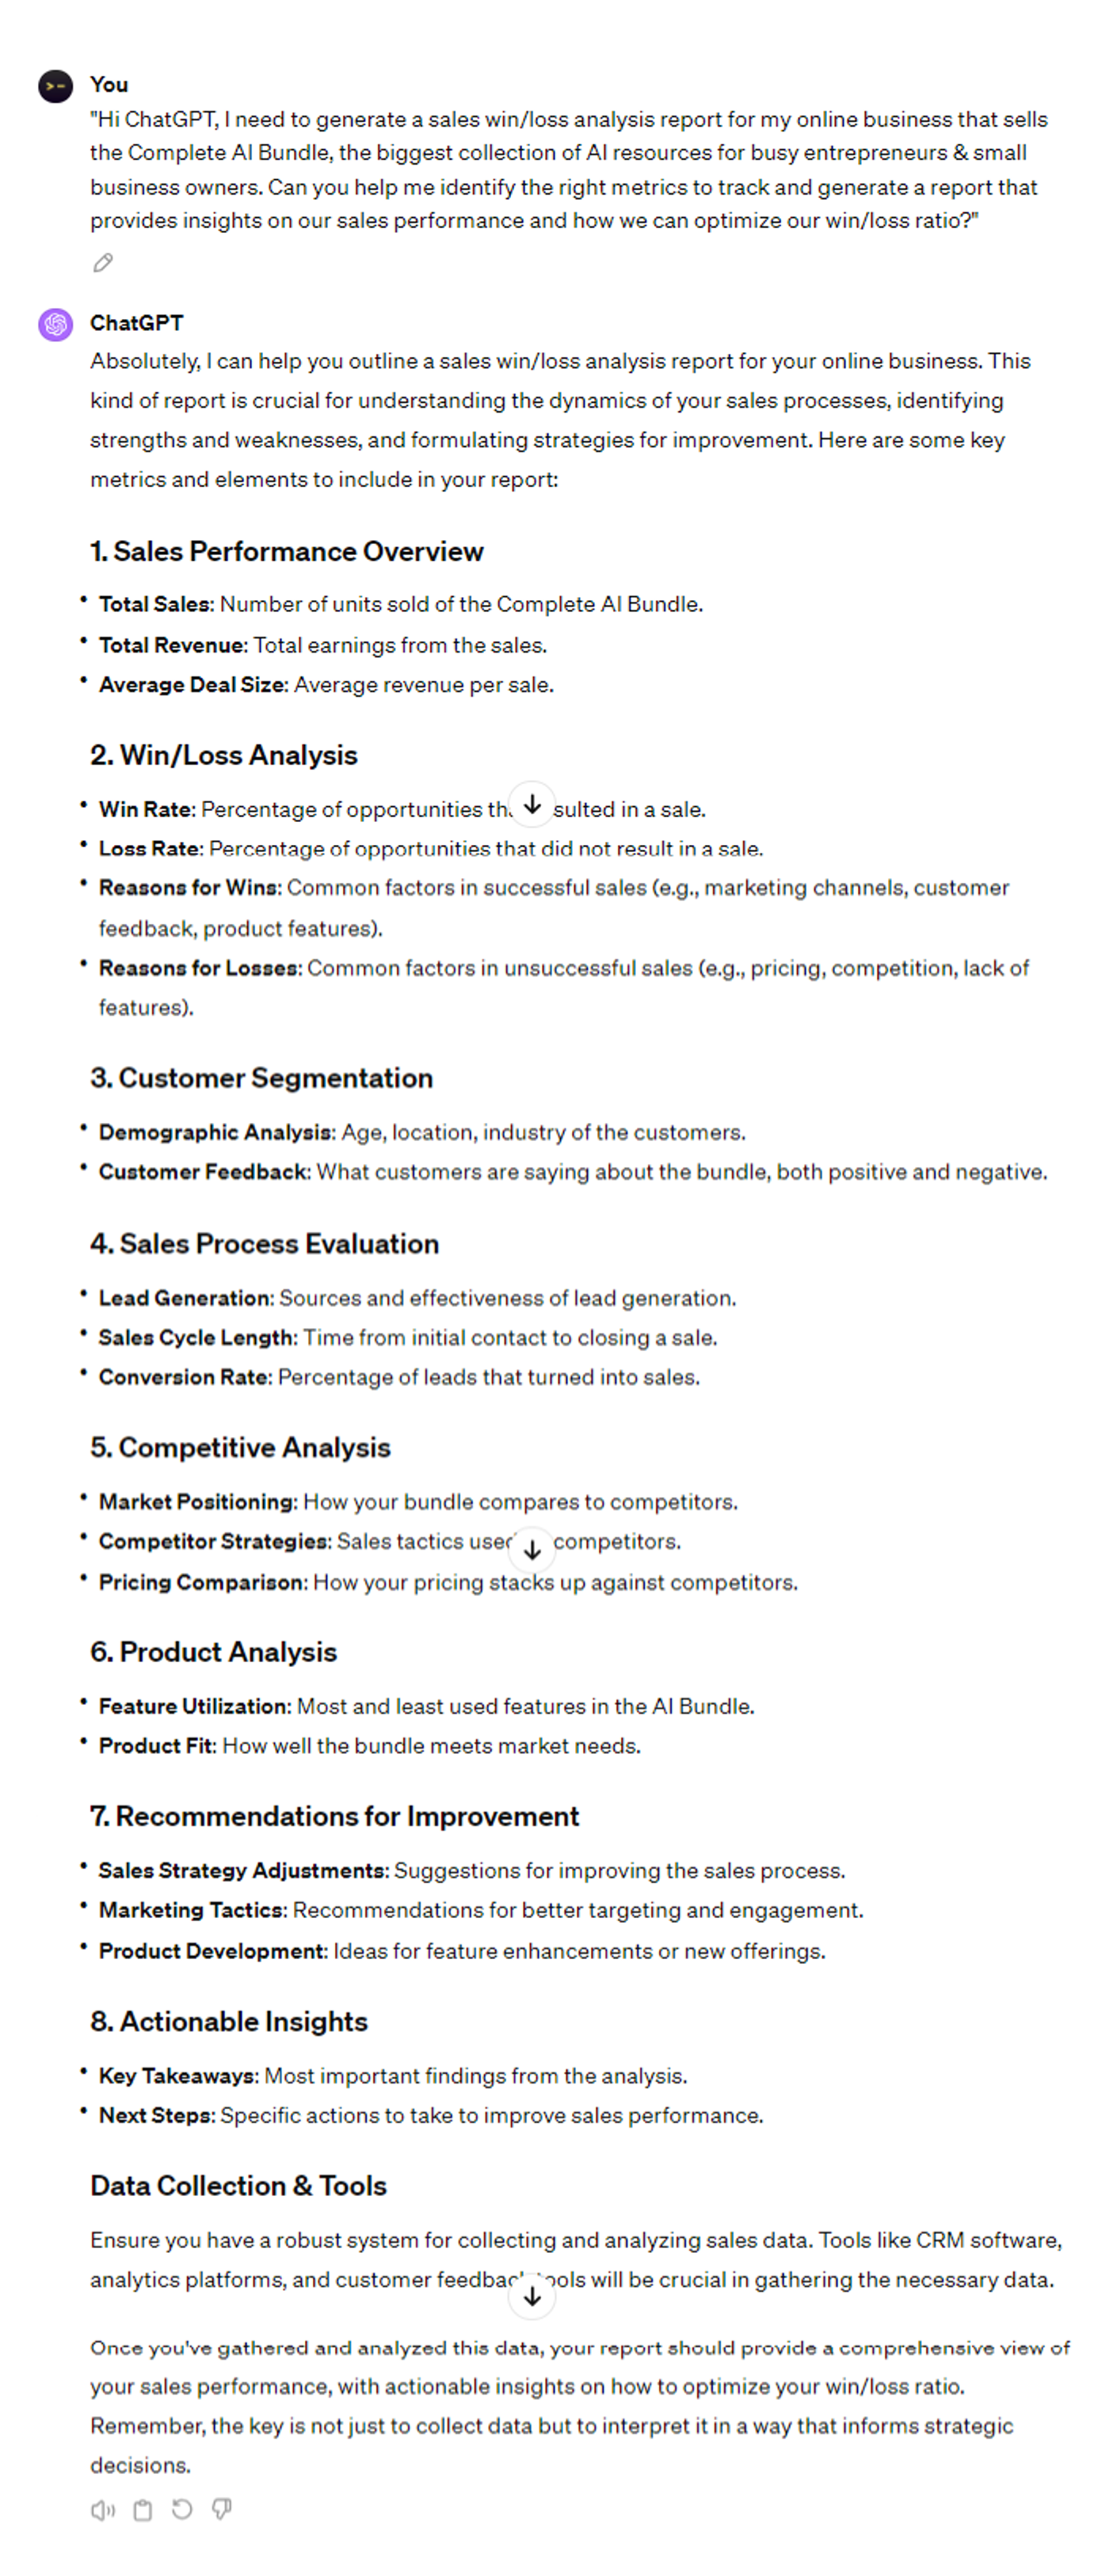 6 Innovative ChatGPT Prompts: Writing competitor analysis reports